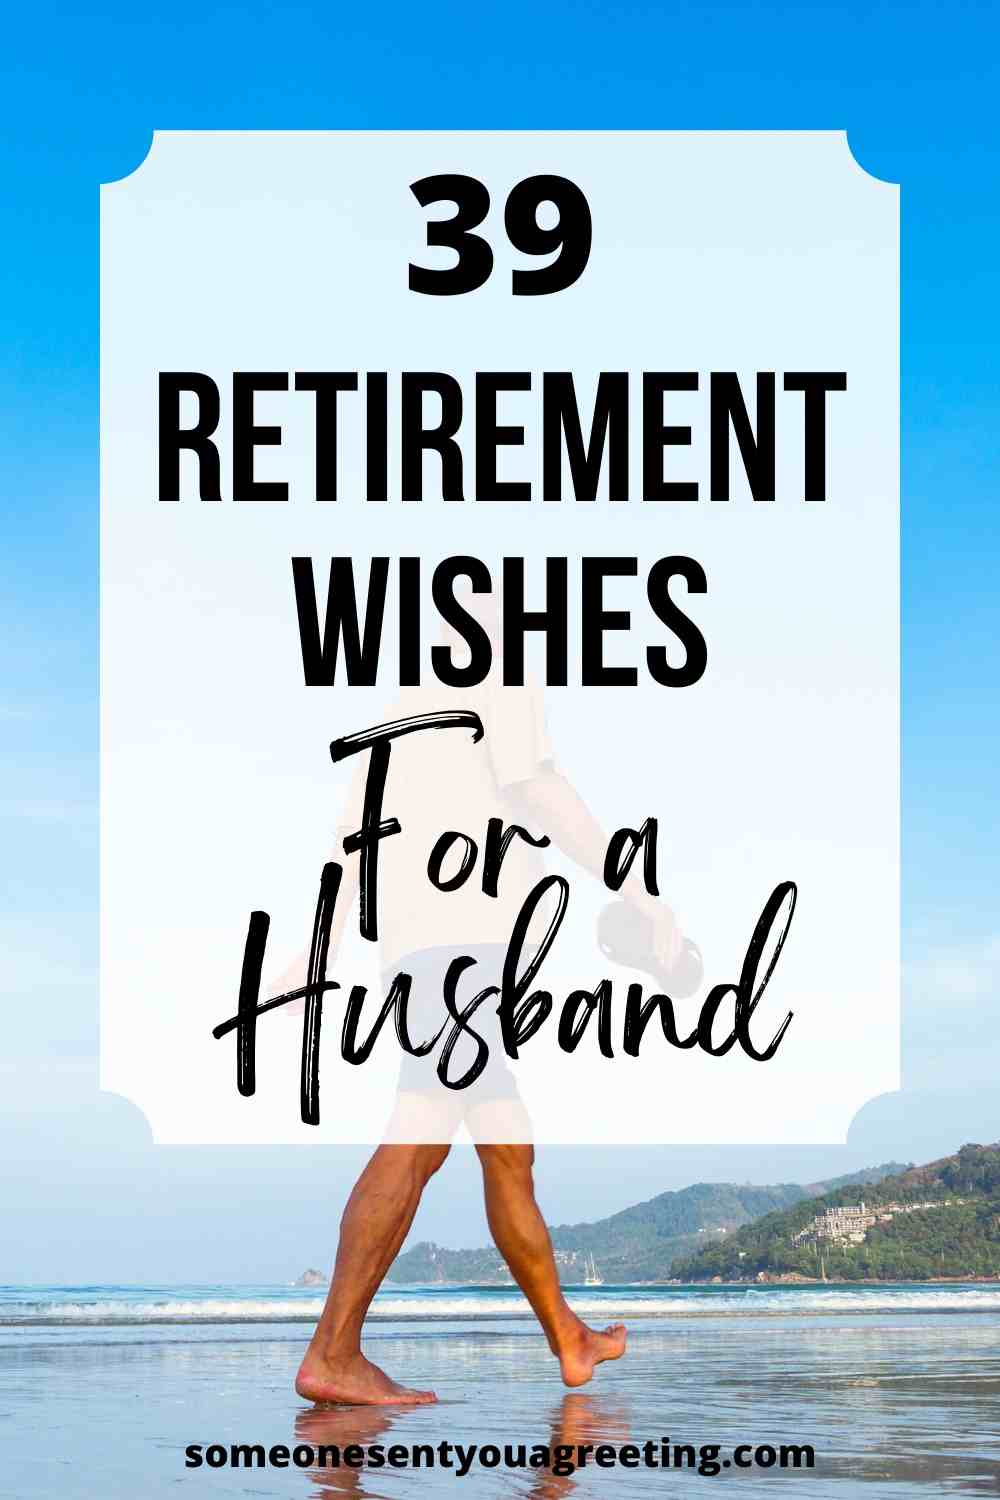 Retirement wishes for husband